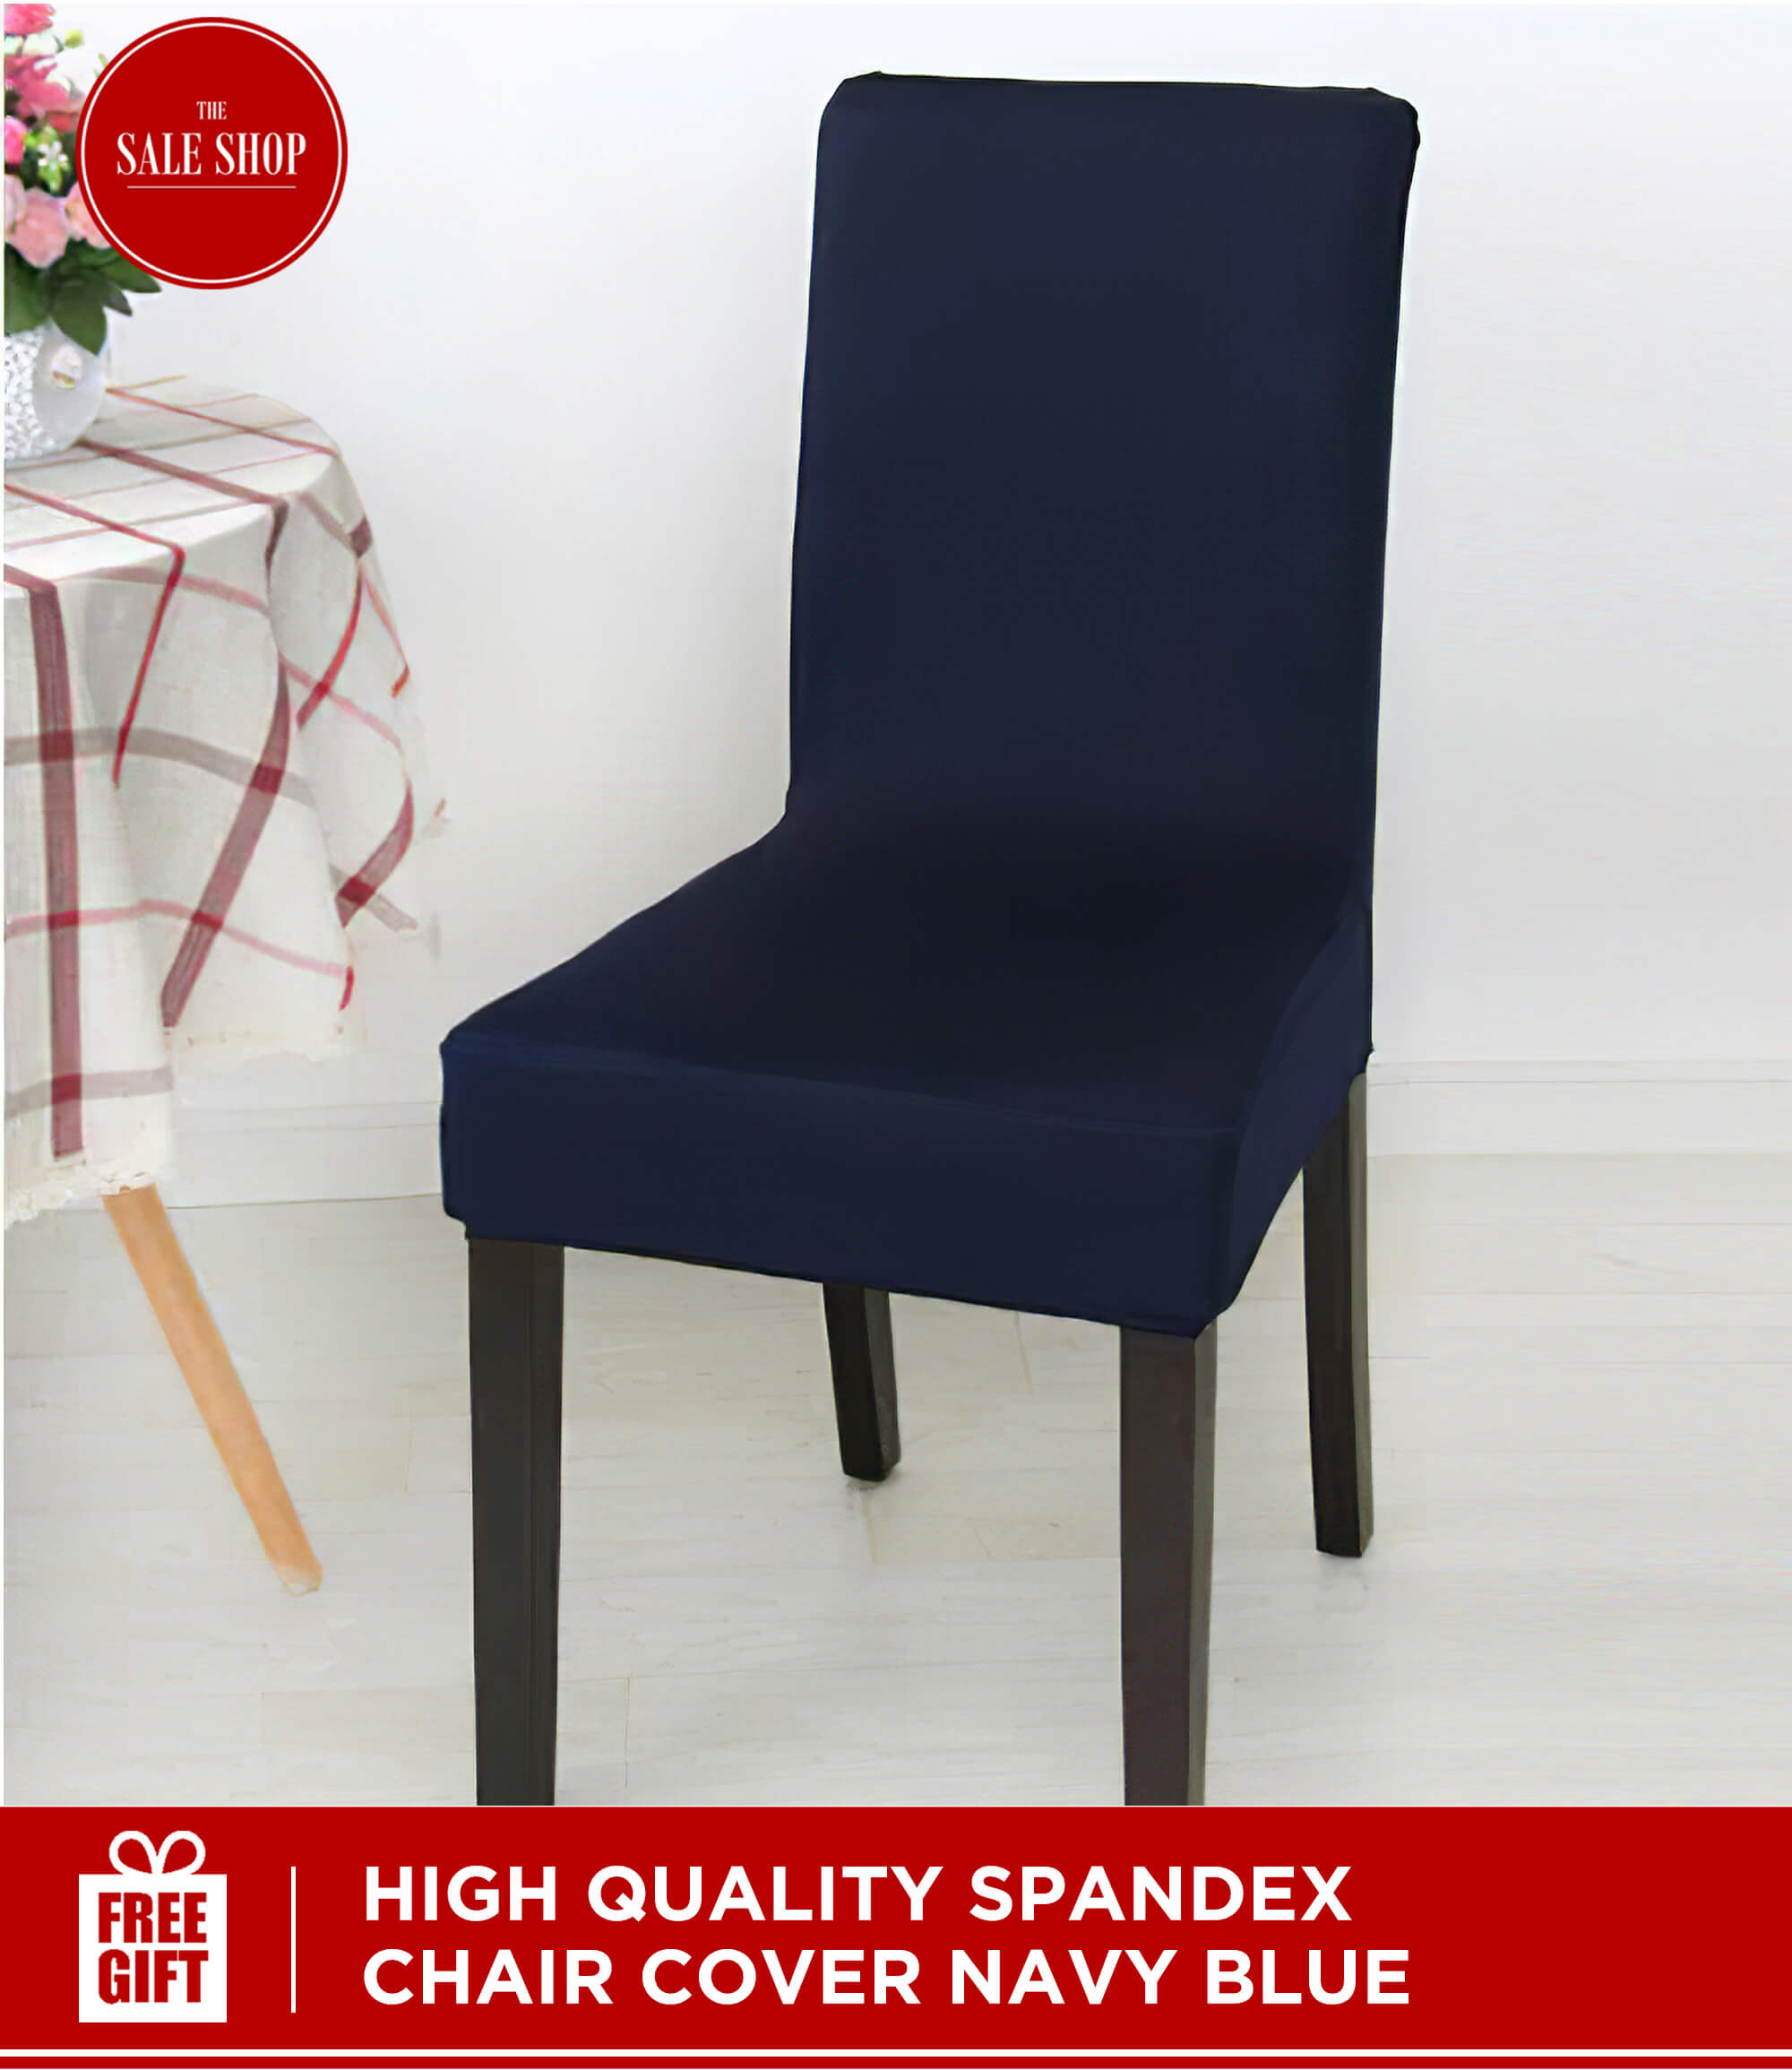 100 Brand New High Quality Solid Color Seat Cover Chair Cover